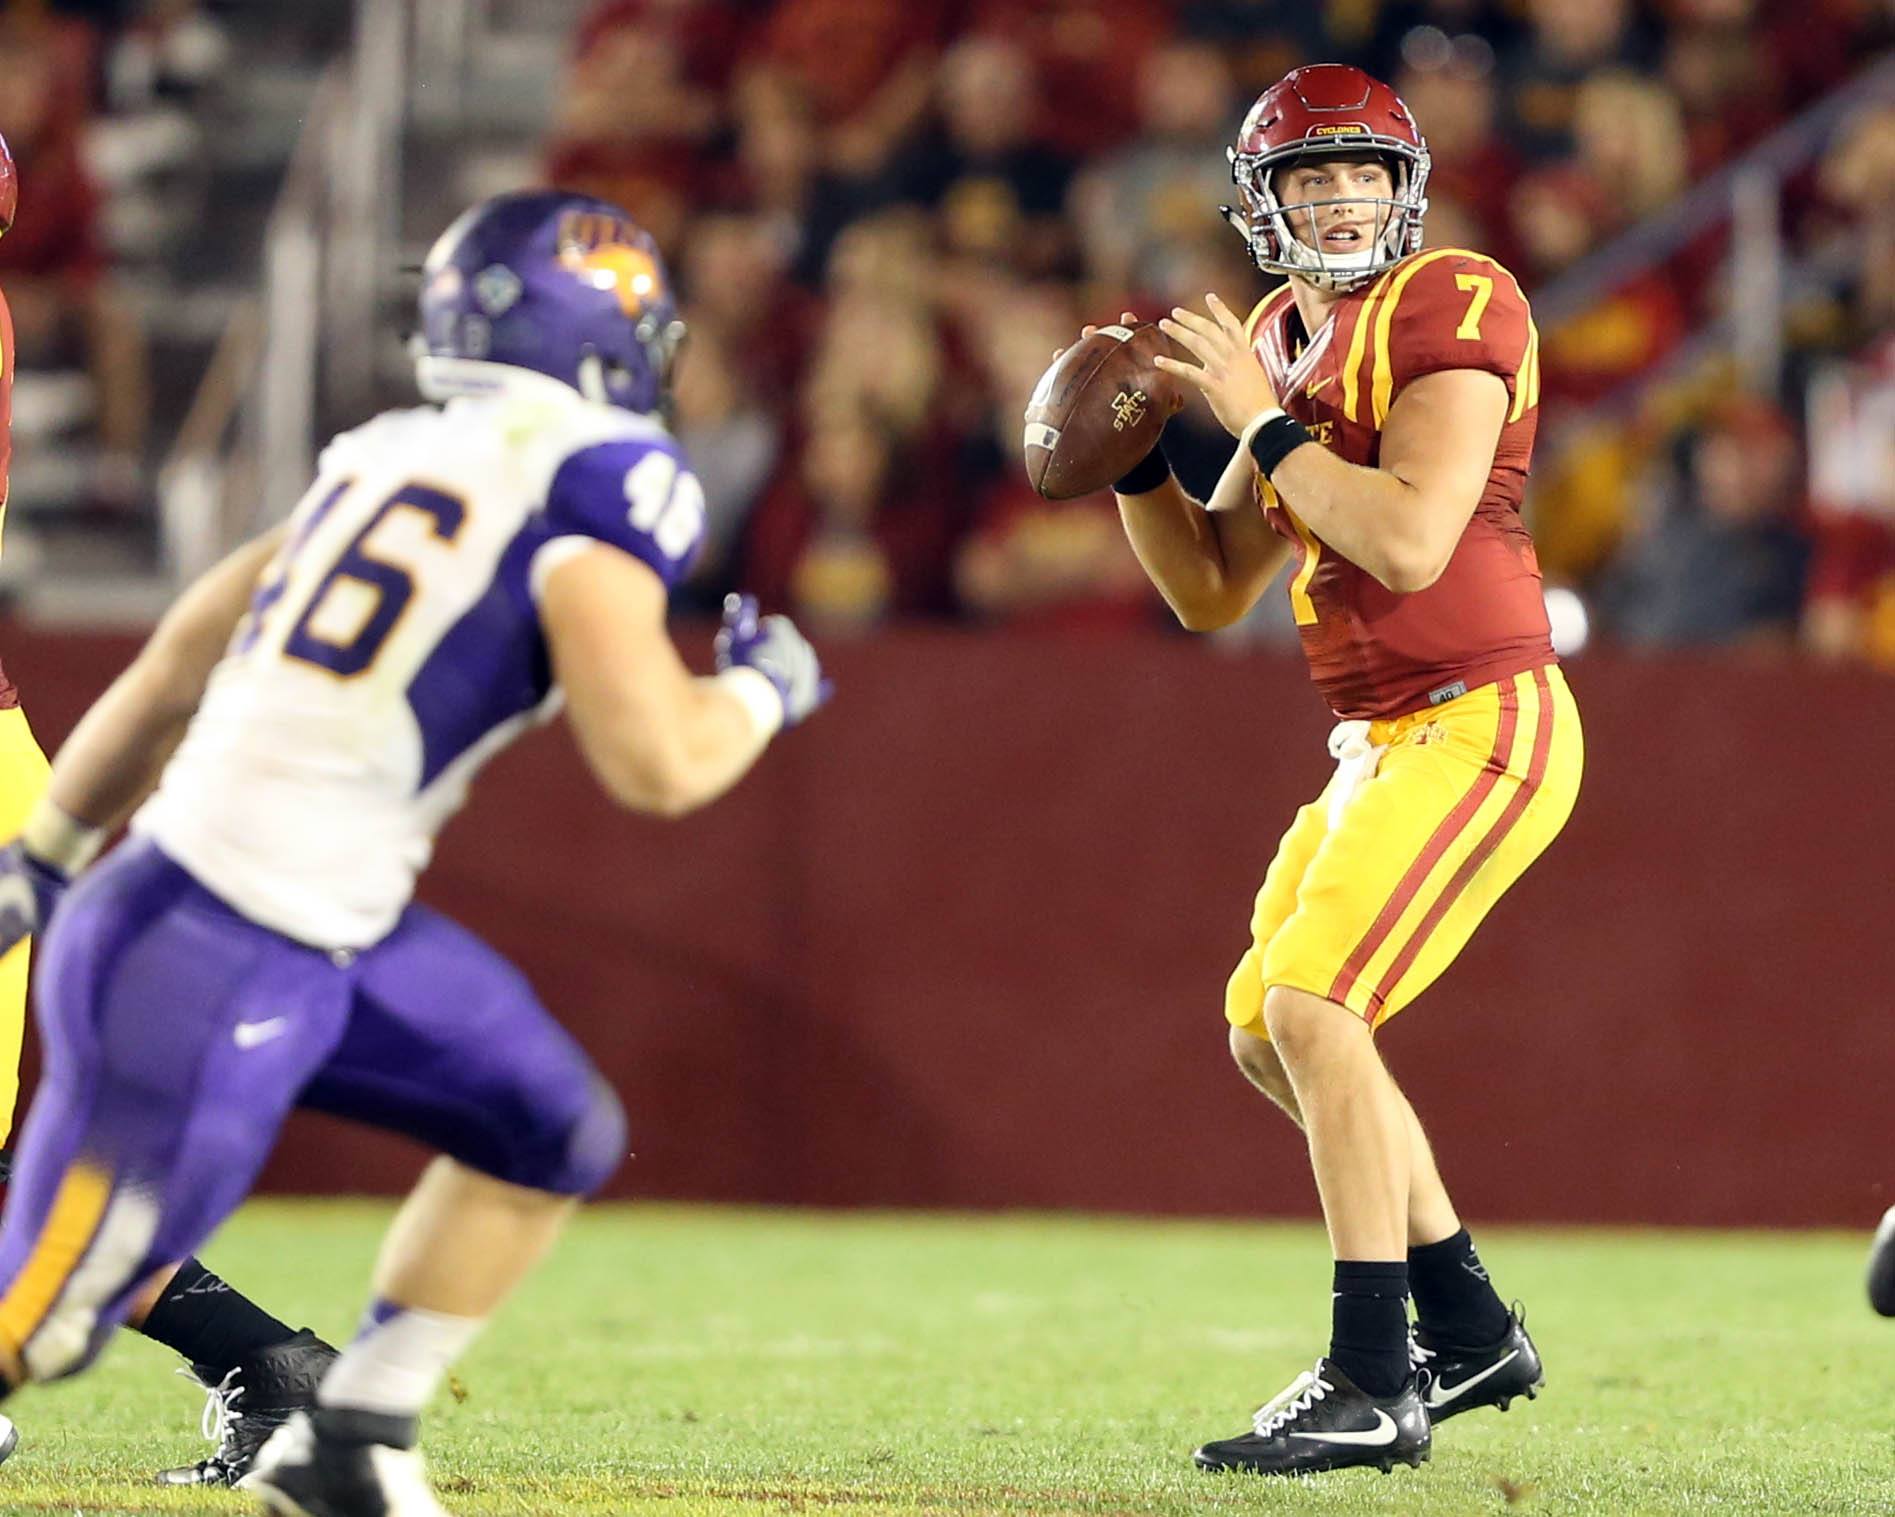 Sep 3, 2016; Ames, IA, USA; Iowa State Cyclones quarterback Joel Lanning (7) looks to pass against the Northern Iowa Panthers at Jack Trice Stadium. The Panthers beat the Cyclones 25-20. Mandatory Credit: Reese Strickland-USA TODAY Sports